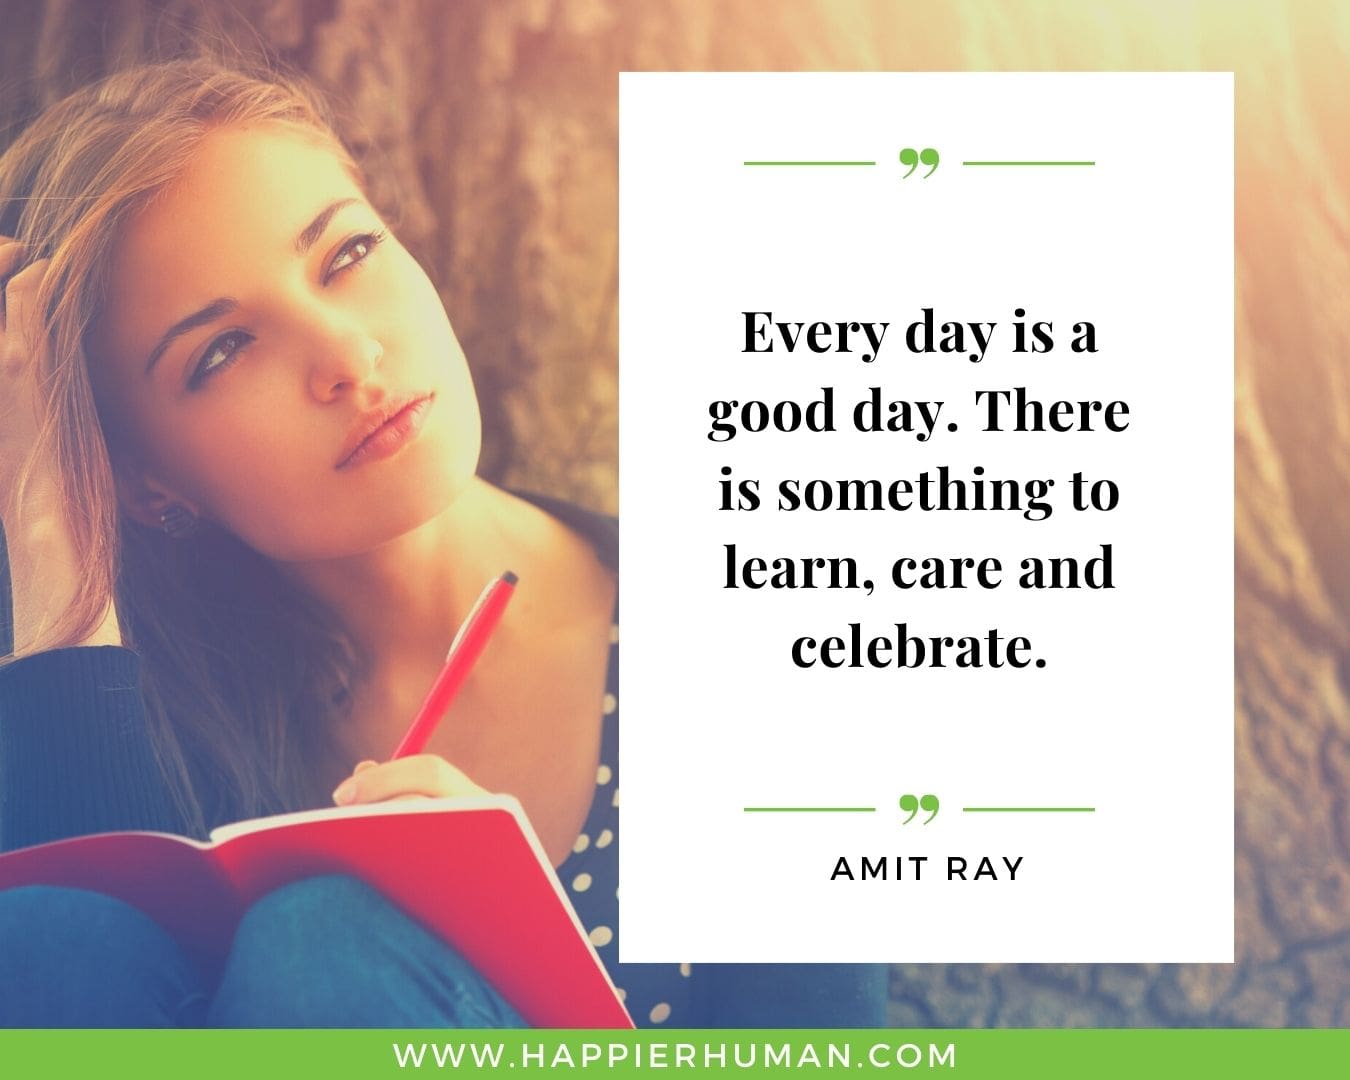 Great Day Quotes - “Every day is a good day. There is something to learn, care and celebrate.” – Amit Ray